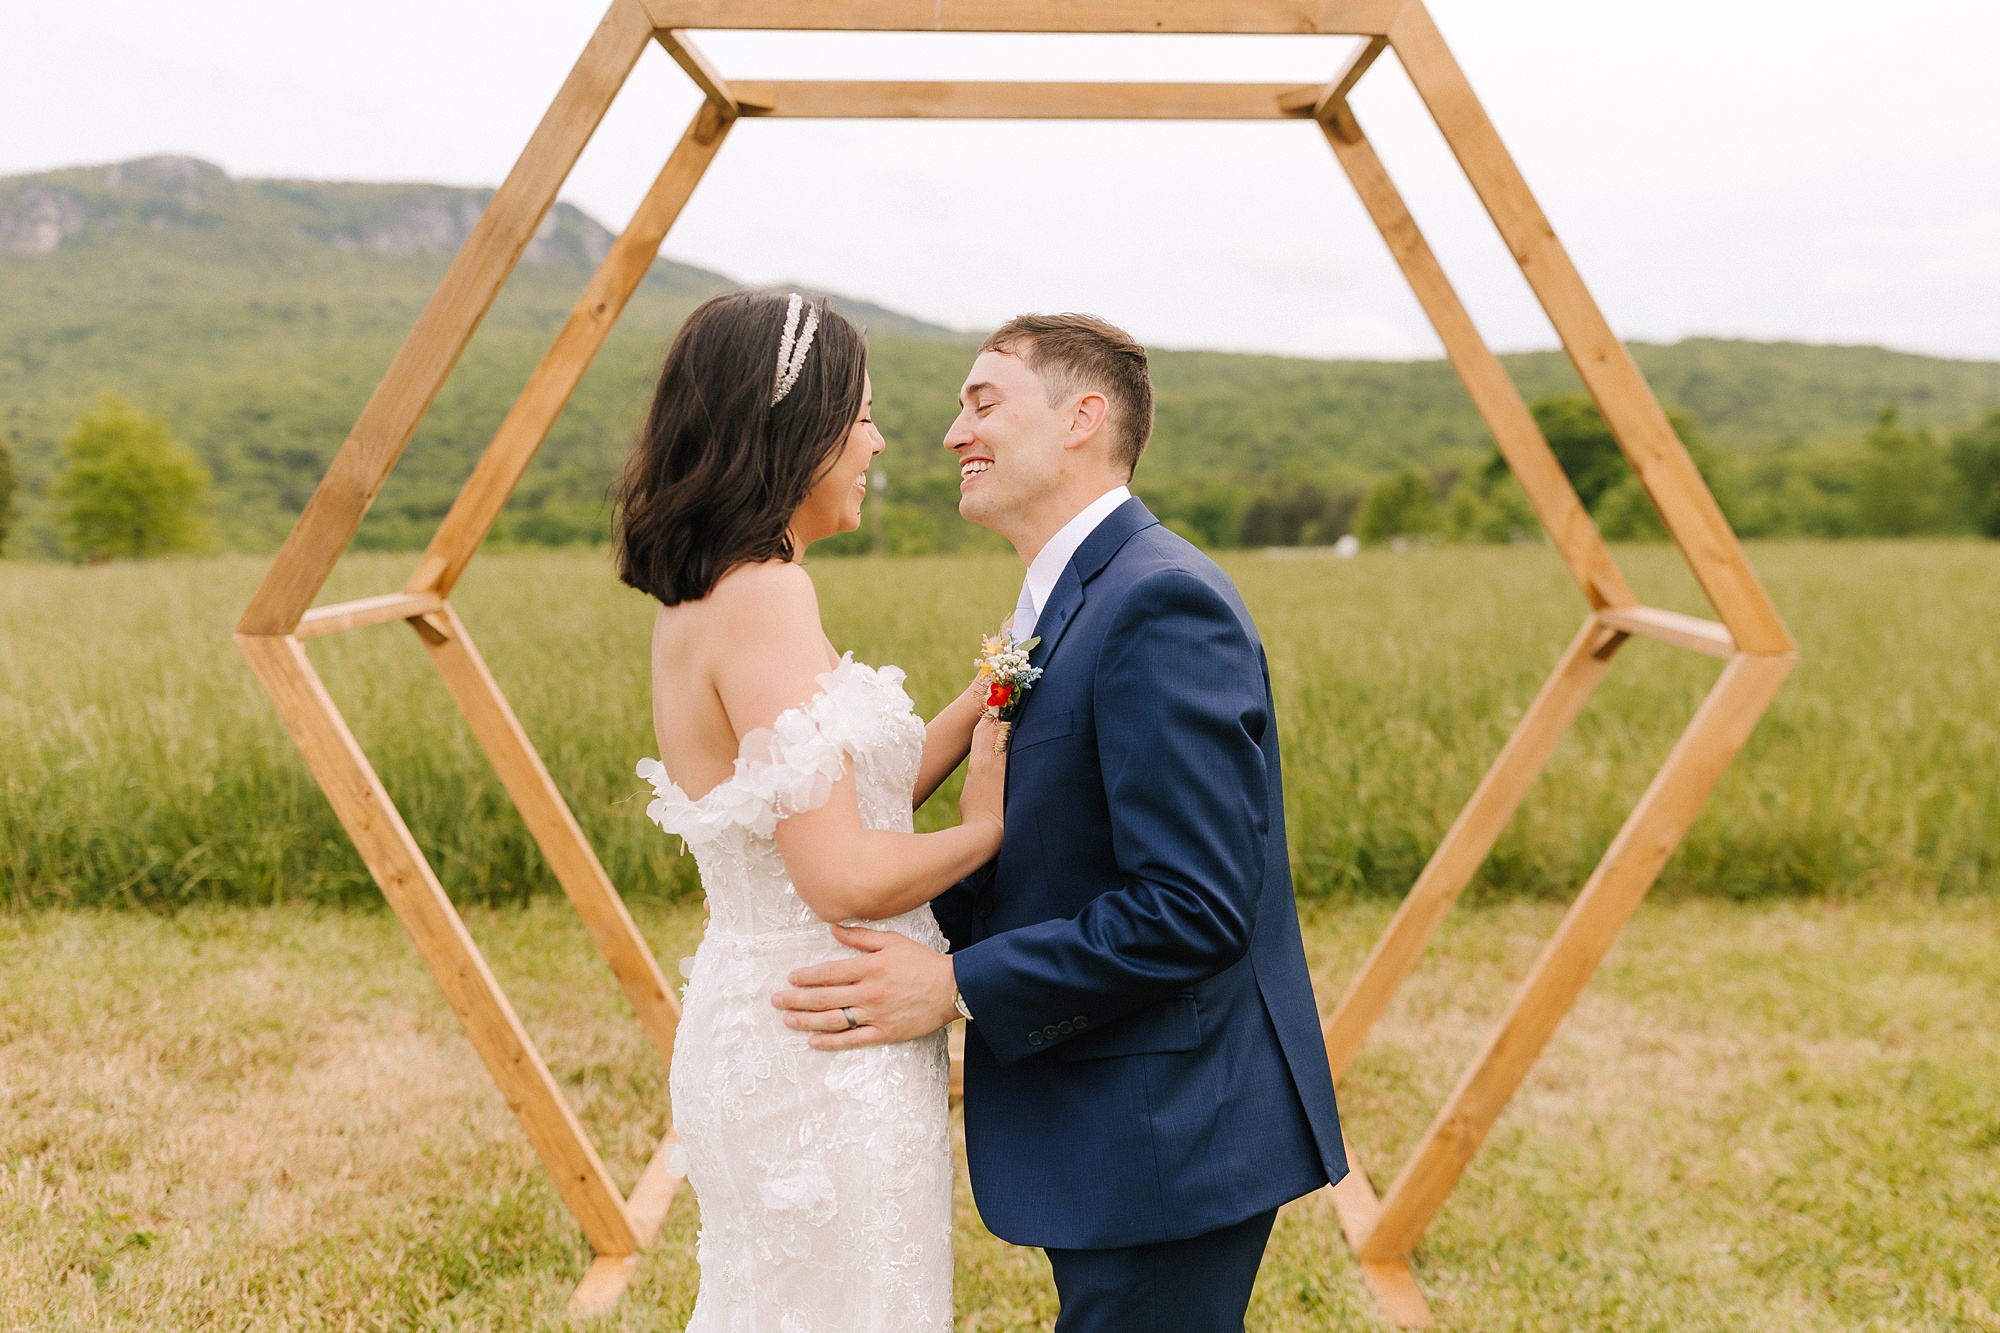 newlyweds smile by wooden arbor